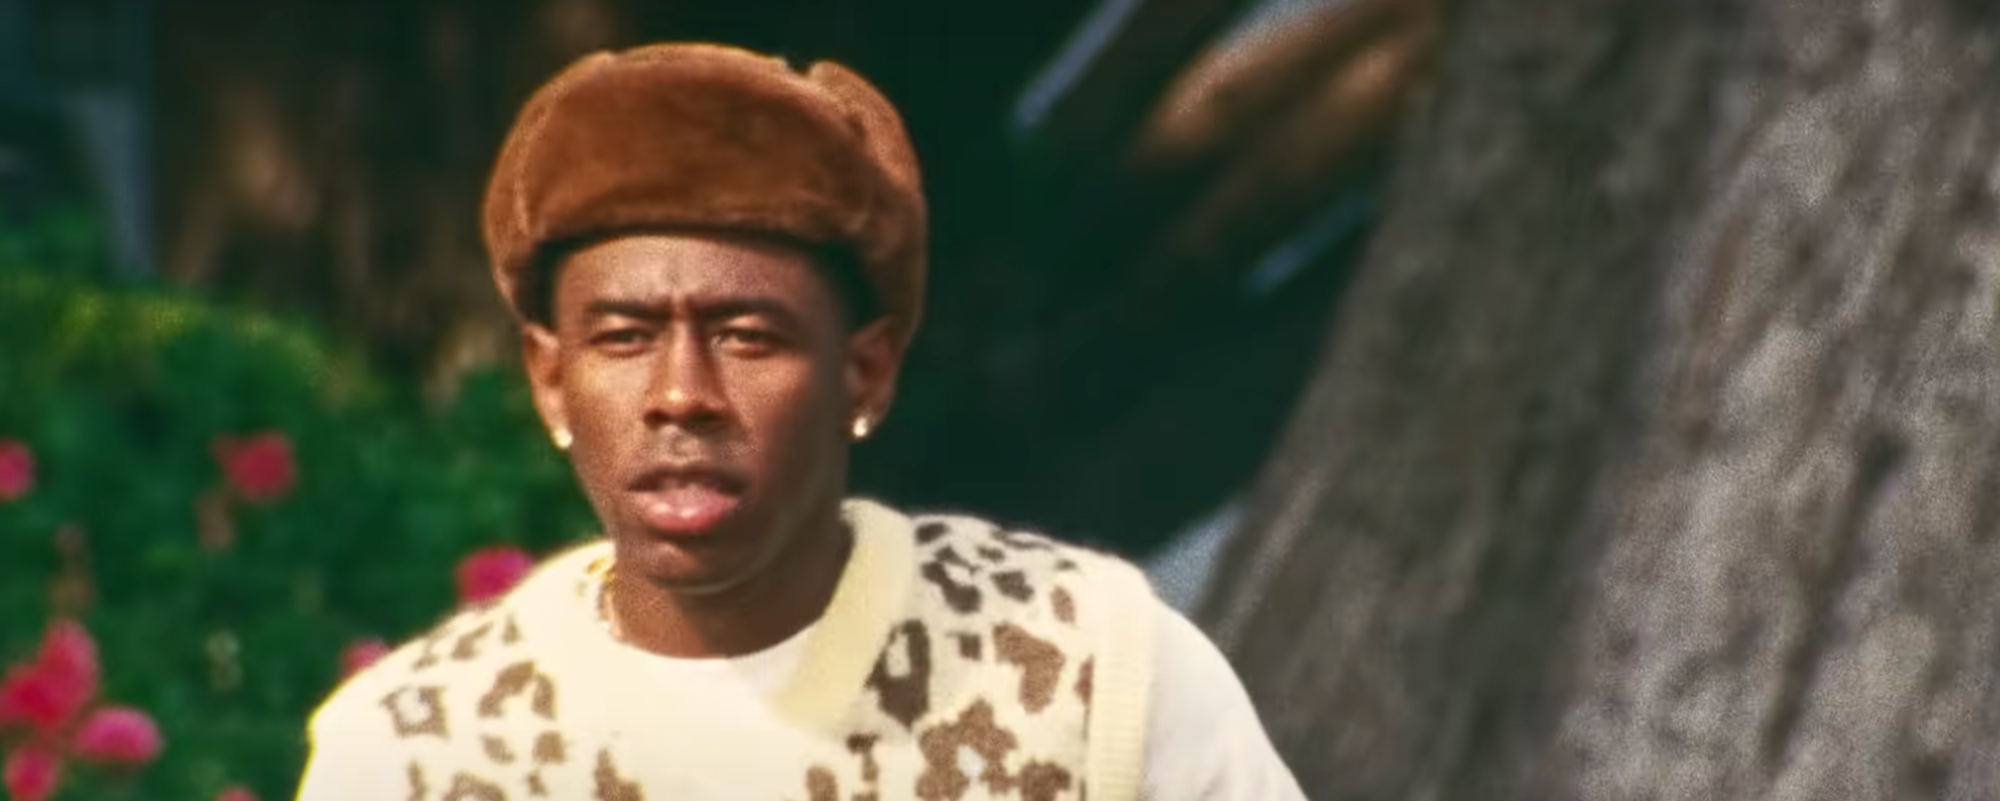 Tyler, the Creator Accuses Former Collaborators of “Selling [His] Old Songs”